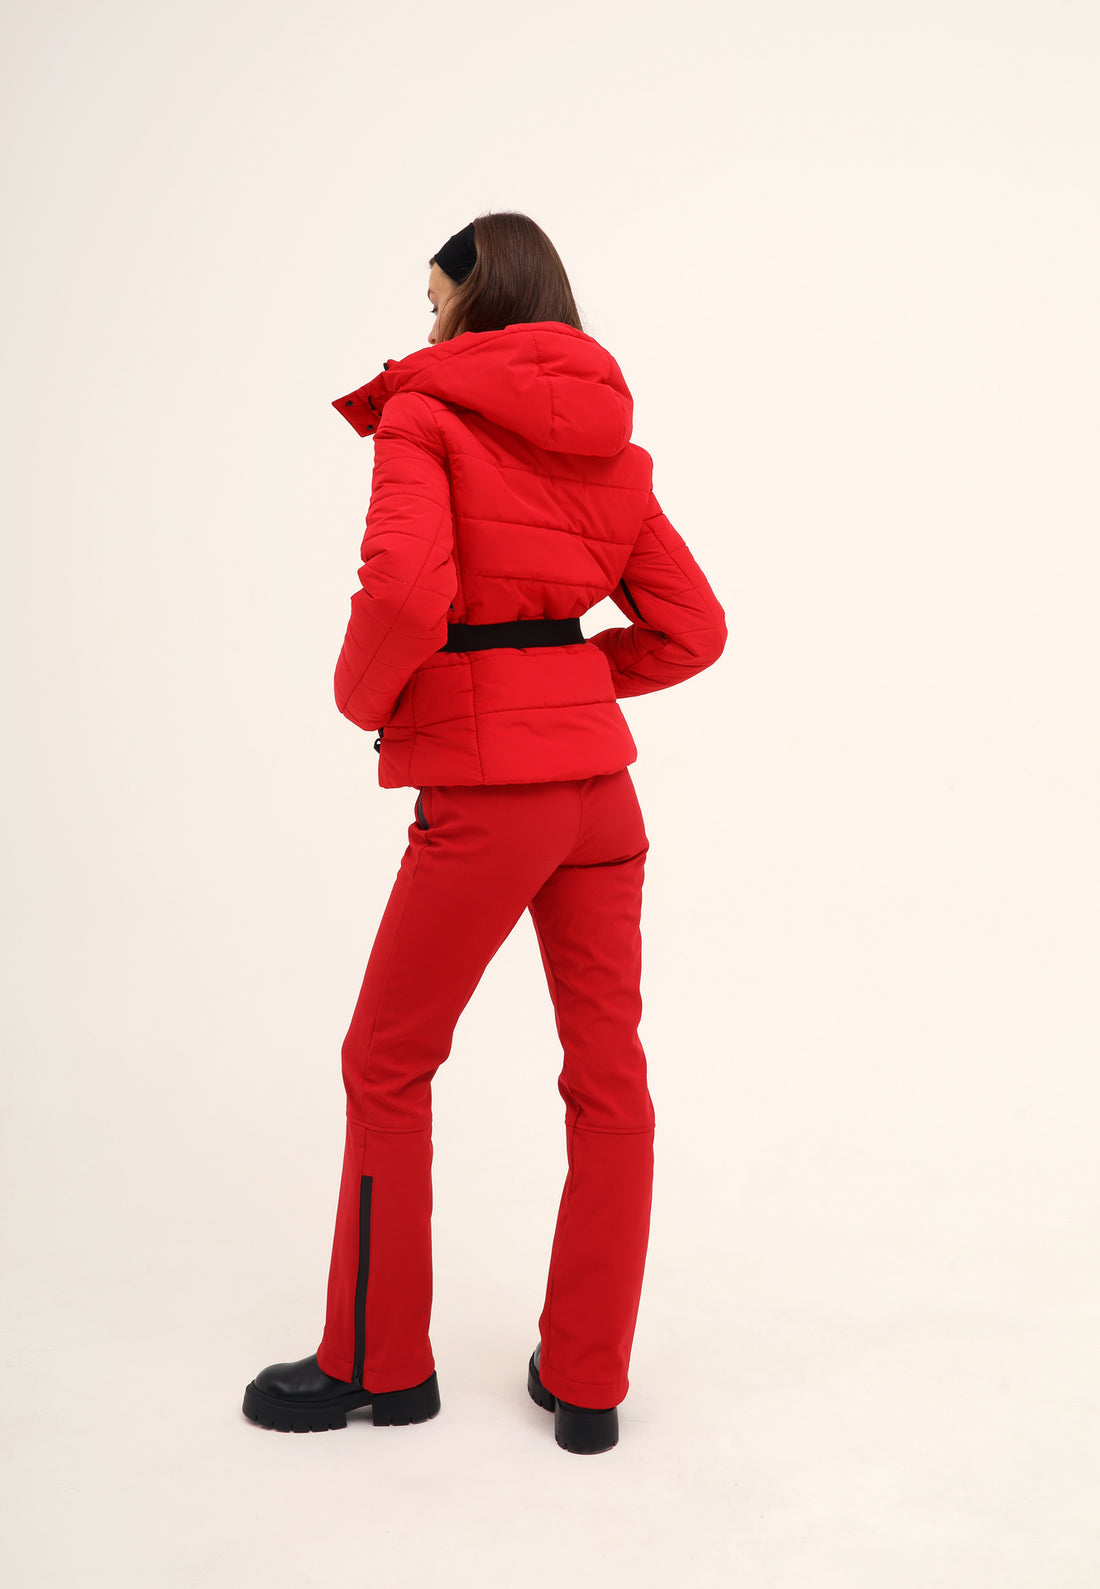 Red two piece ski outfit - McKinley Red - Red ski suit